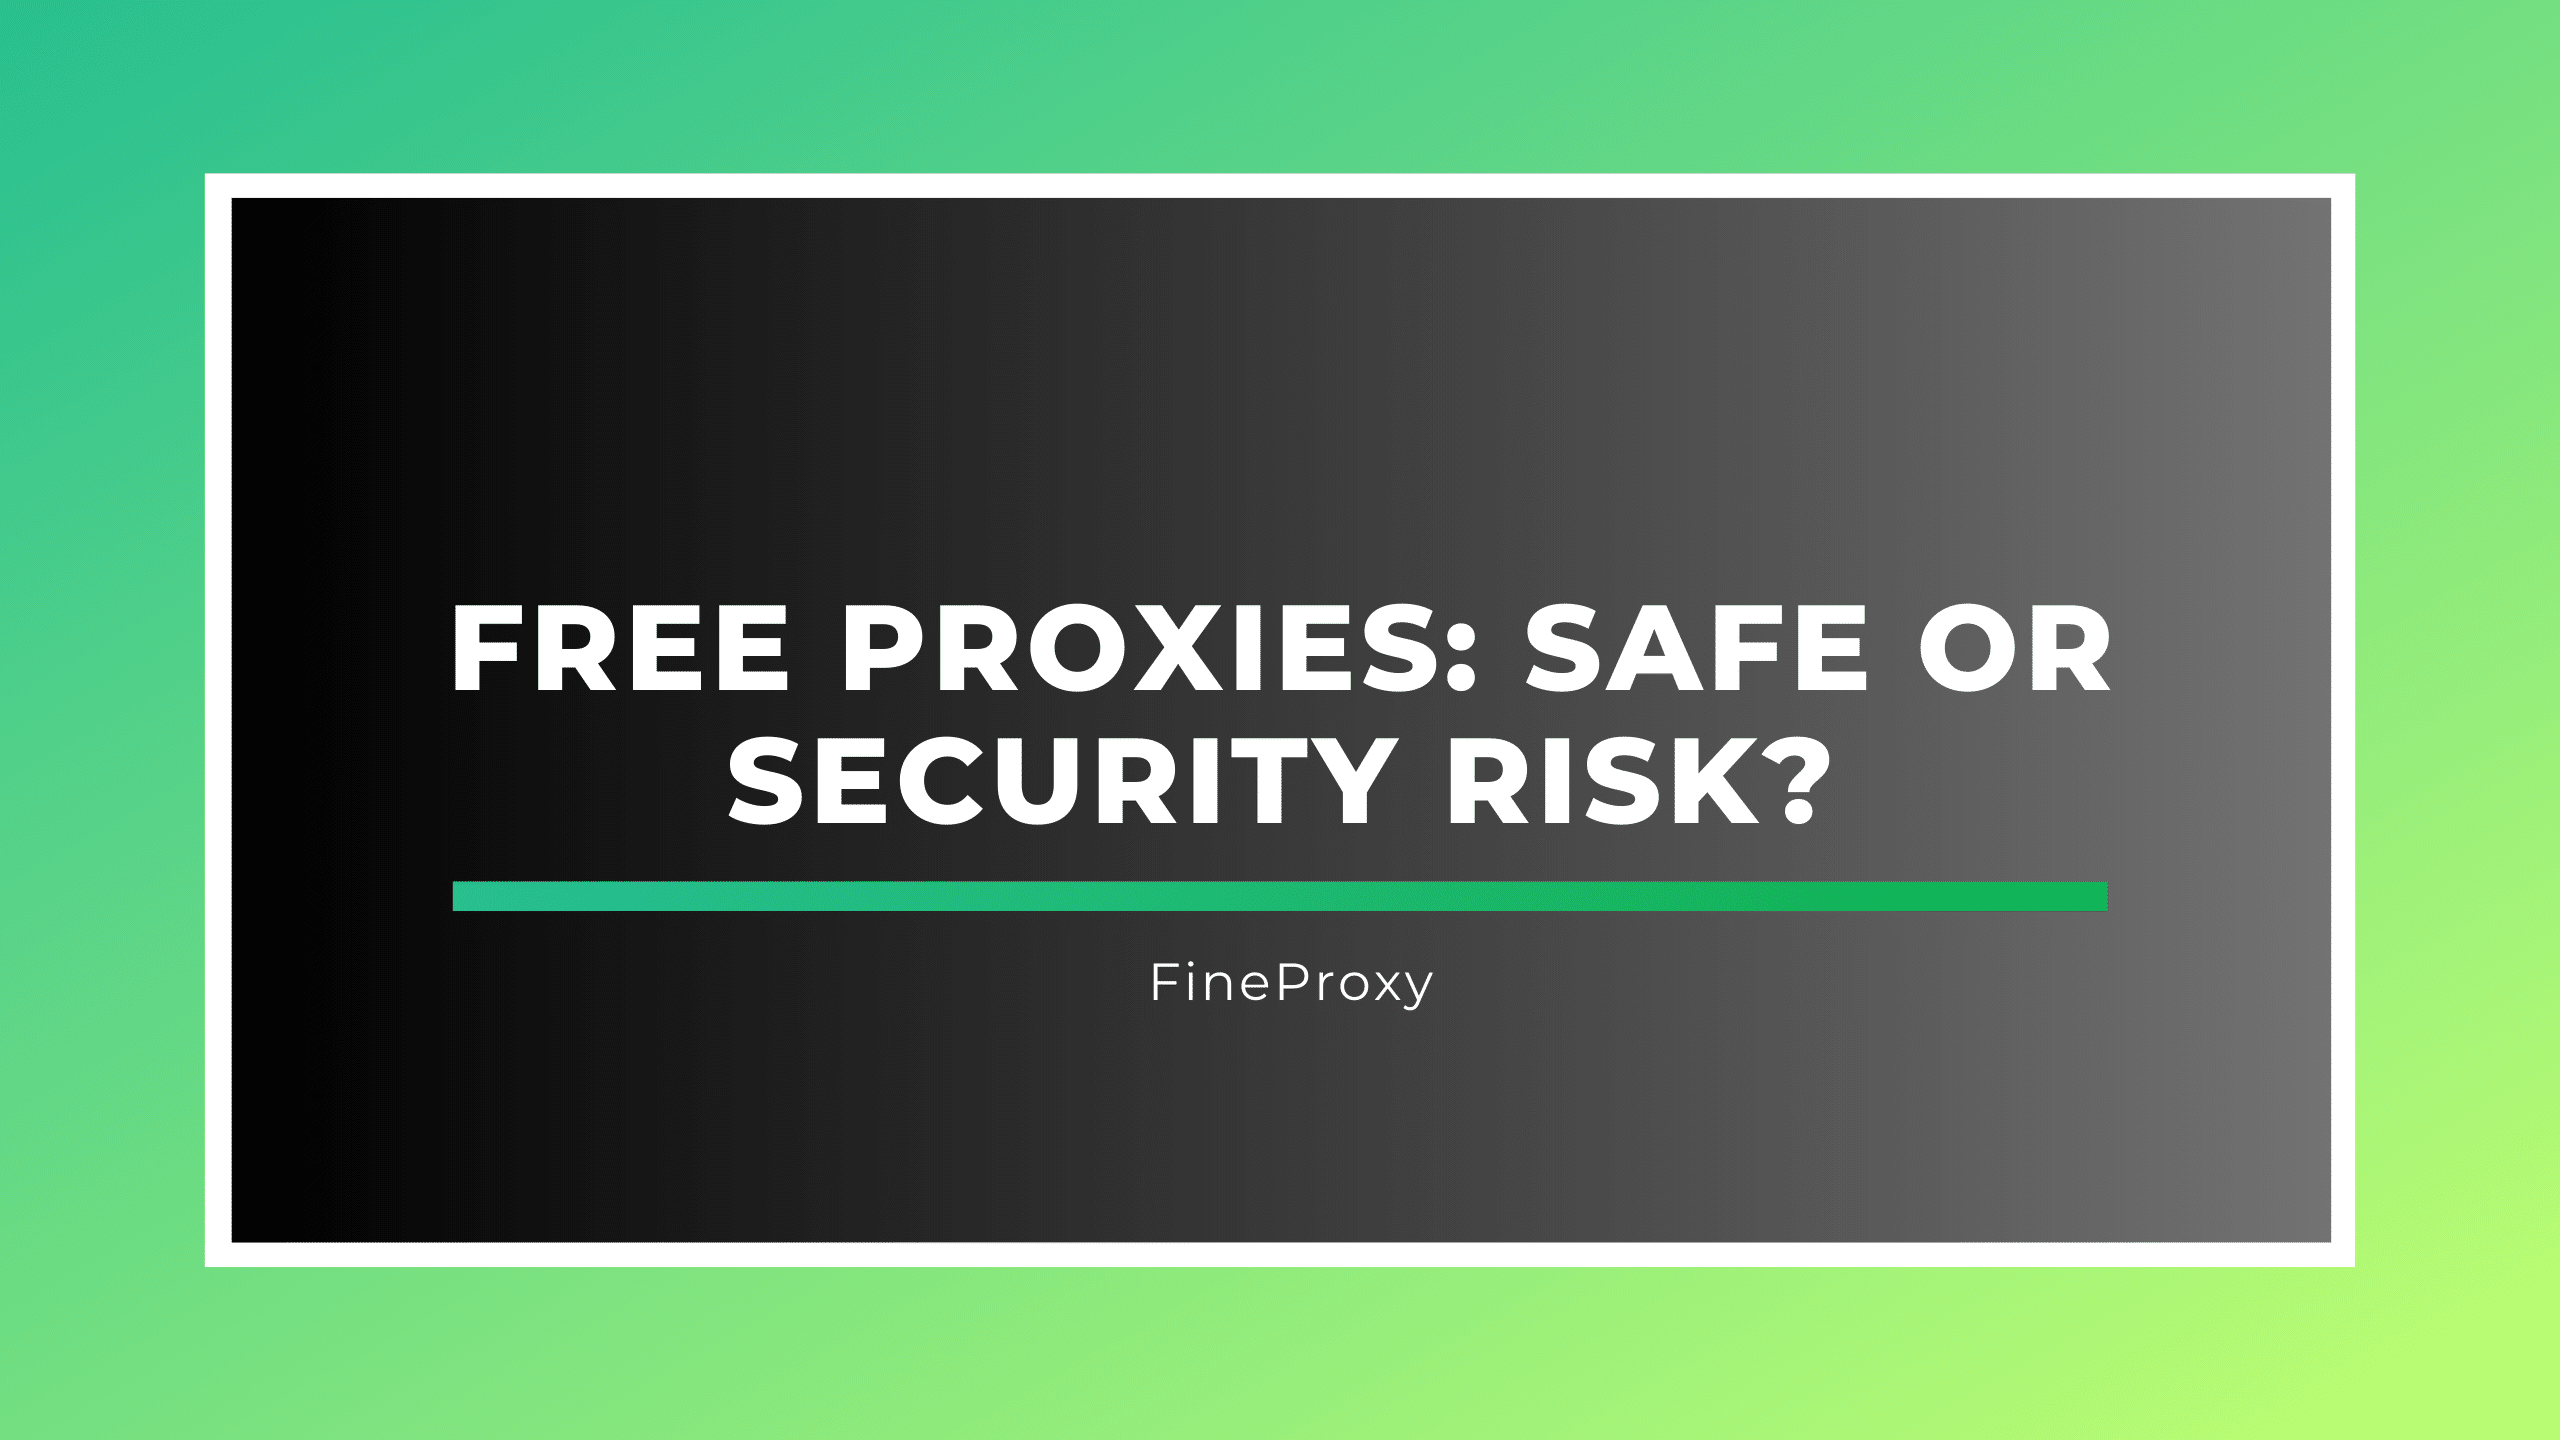 Free Proxies: Safe or Security Risk?